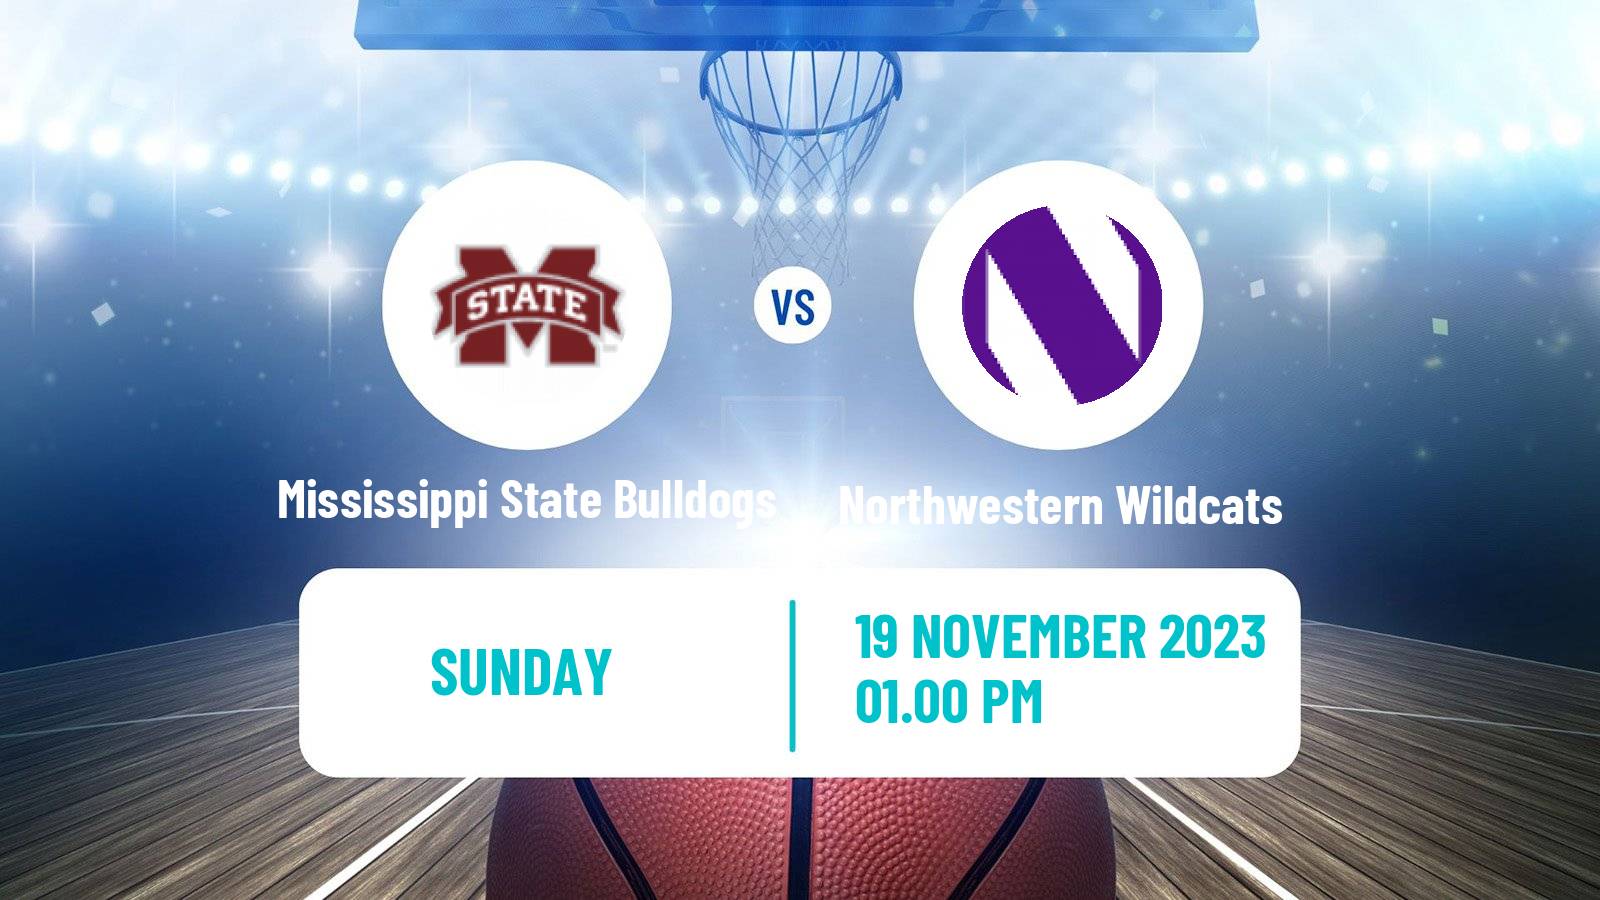 Basketball NCAA College Basketball Mississippi State Bulldogs - Northwestern Wildcats